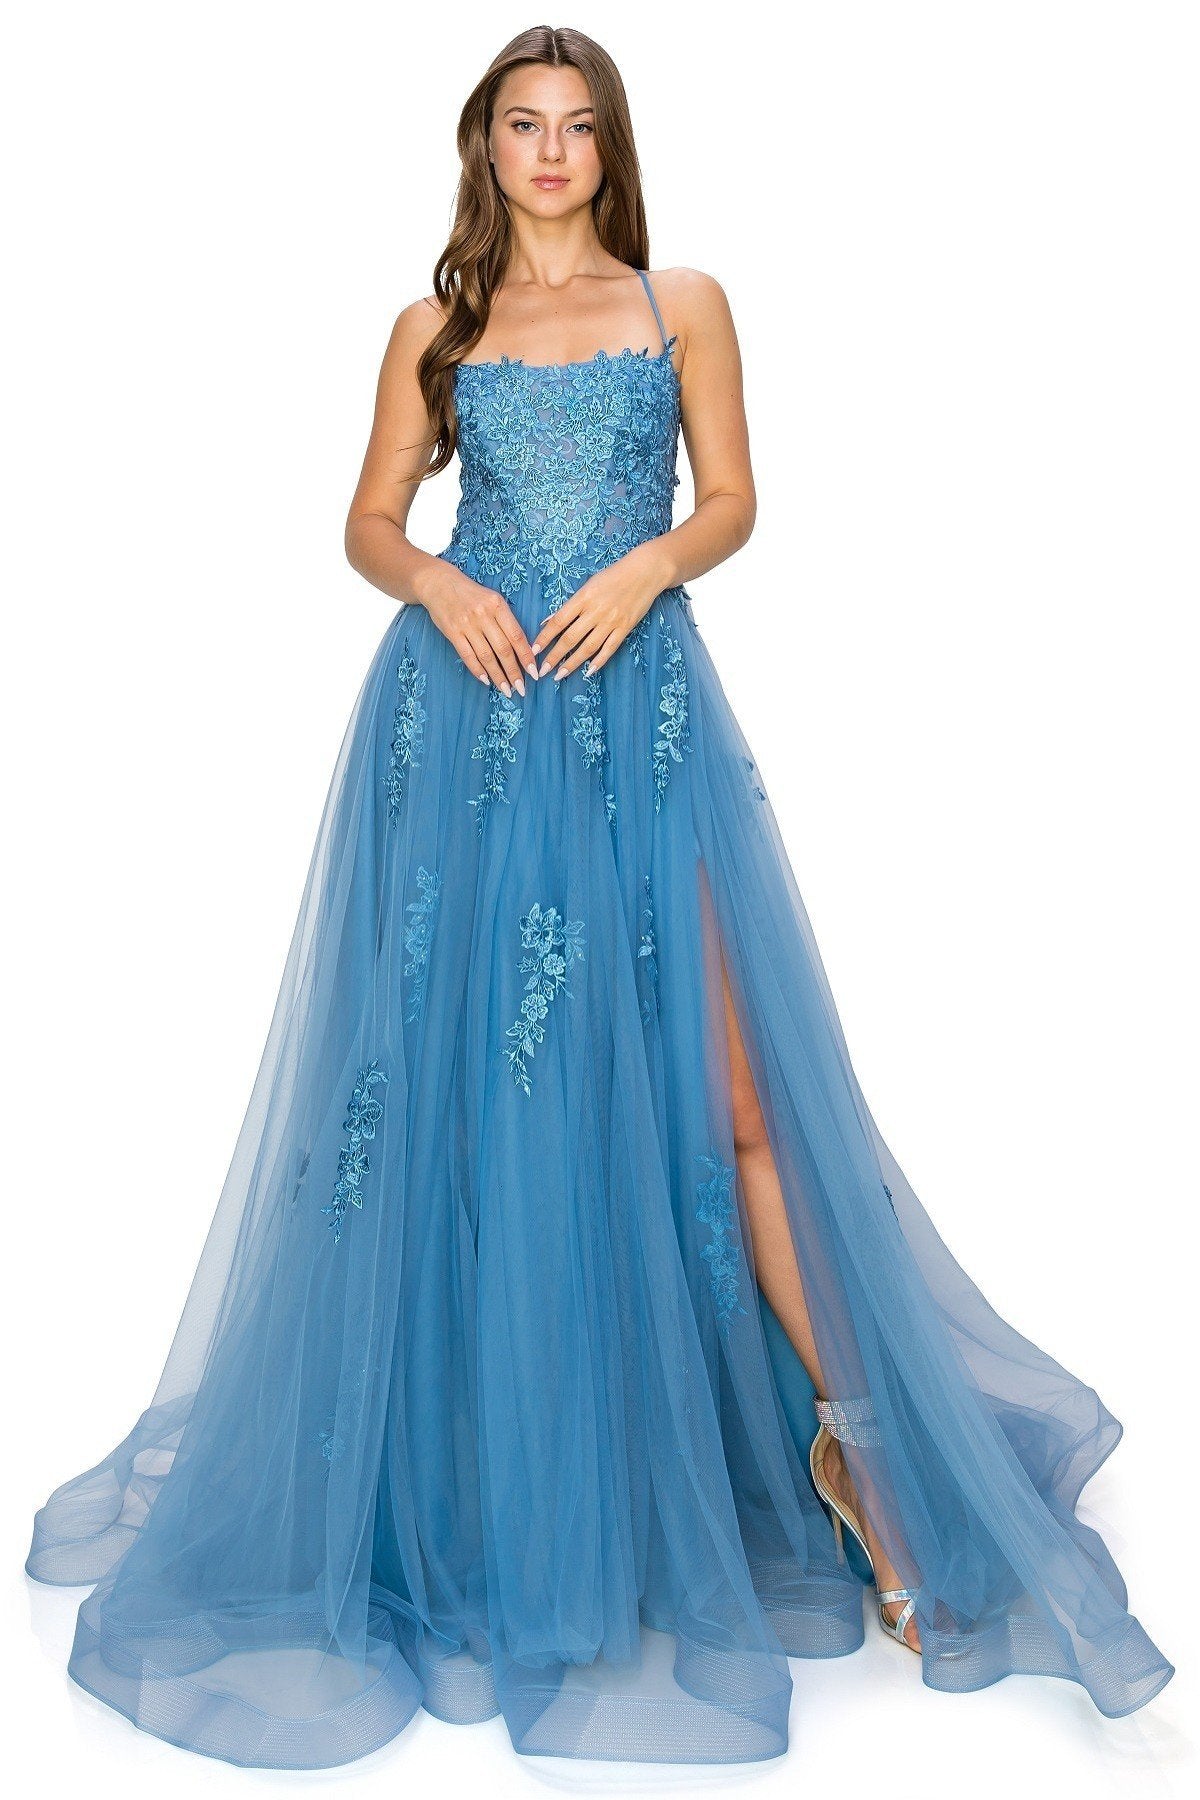 Dusty-Blue Lace Tulle Gown by Cinderella Couture USA AS8031J-DBlue-Q - Special Occasion/Curves